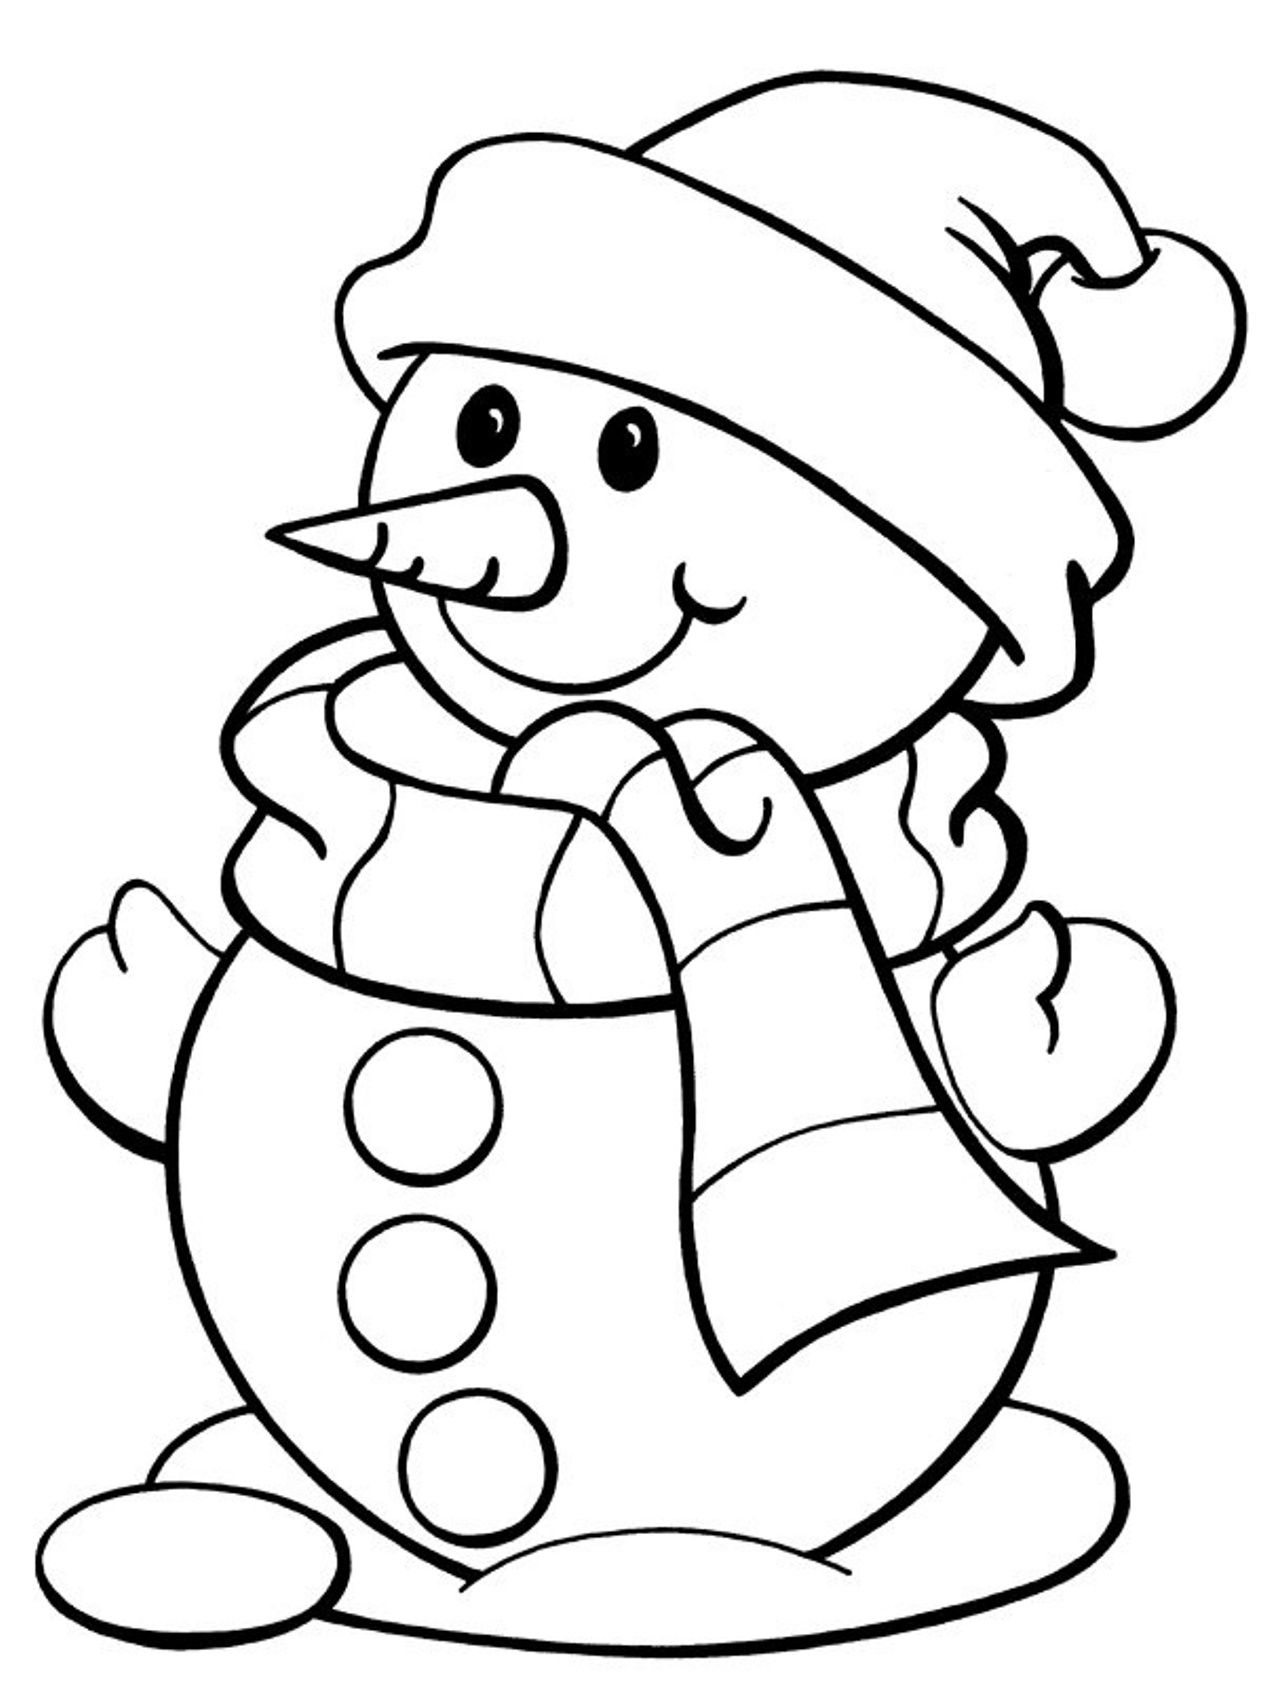 snow coloring page snow white coloring pages best coloring pages for kids page coloring snow 